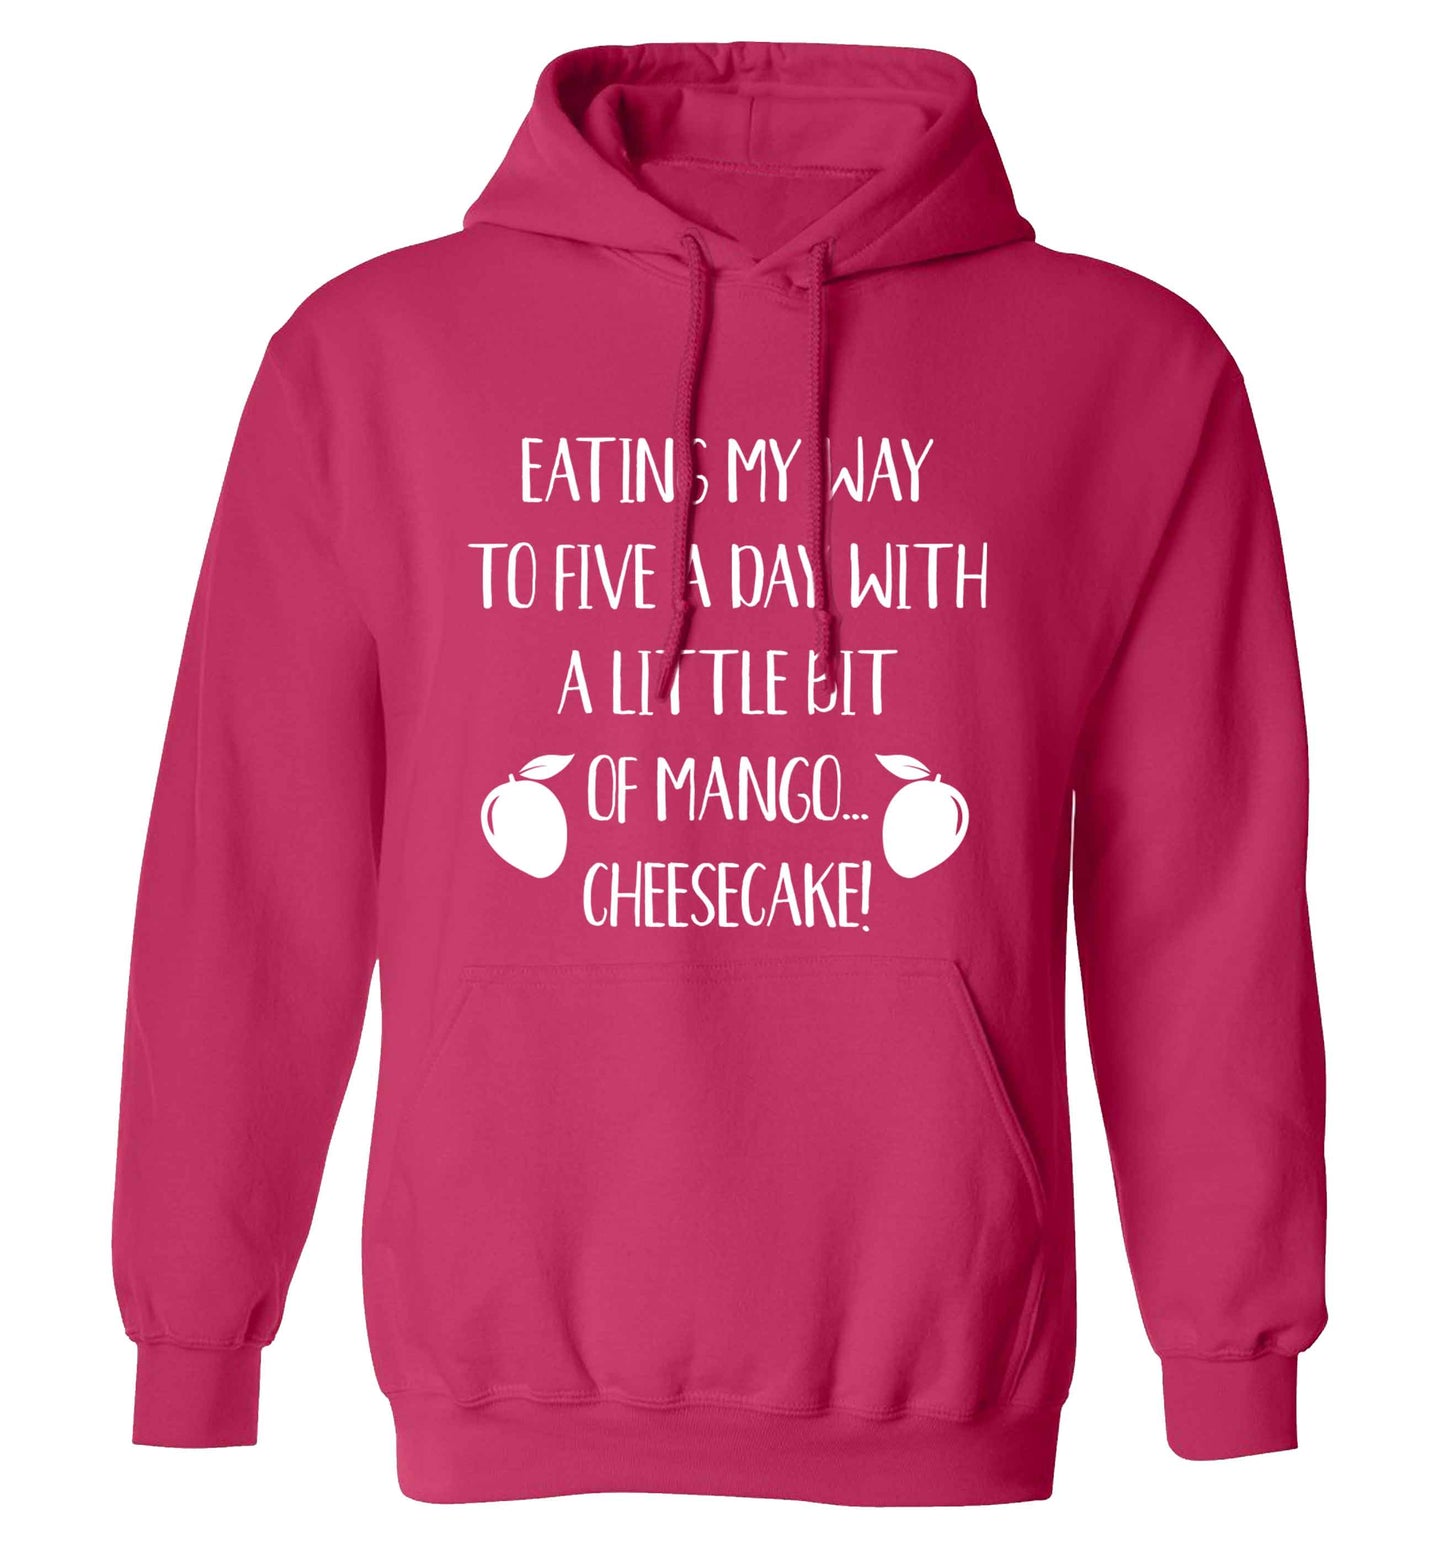 Eating my way to five a day with a little bit of mango cheesecake adults unisex pink hoodie 2XL